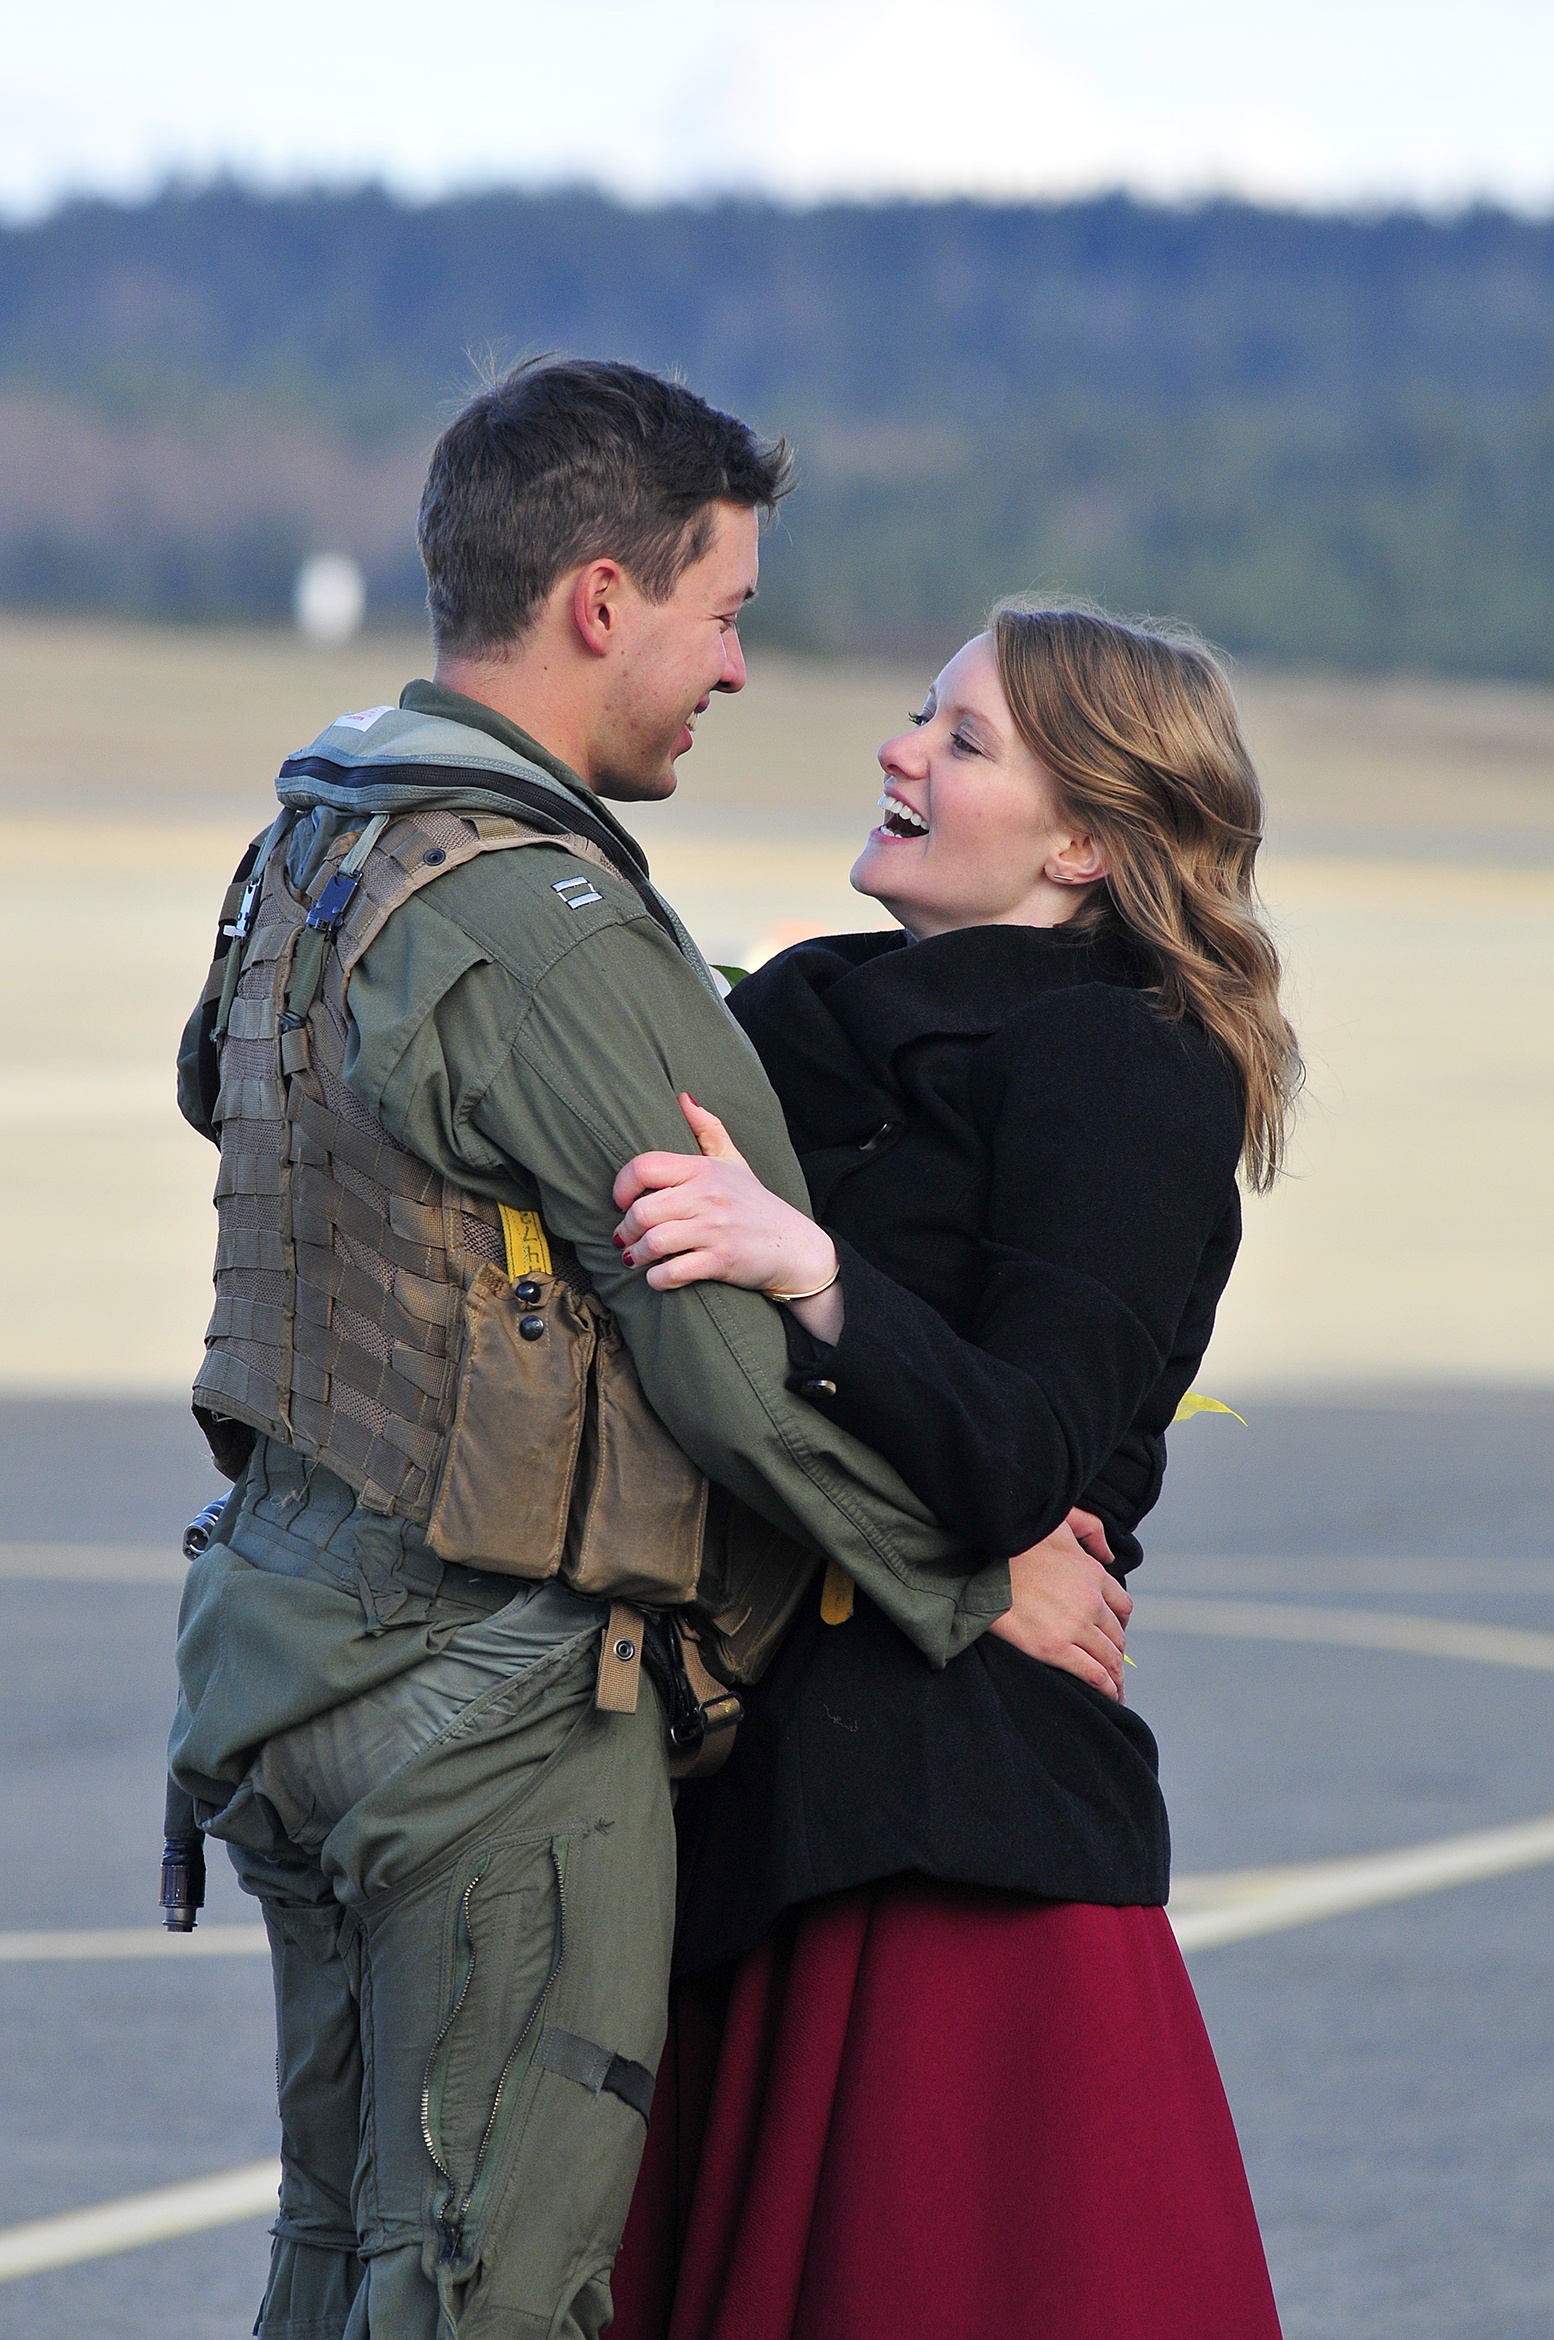 Lt. Chris Ihlan and his girlfriend Naomi Fosket are reunited at Naval Air Station Whidbey Island Dec. 30, 2016, after a six-month deployment overseas, just in time to celebrate New Years Eve. Photo by Michael Watkins/Whidbey News-Times